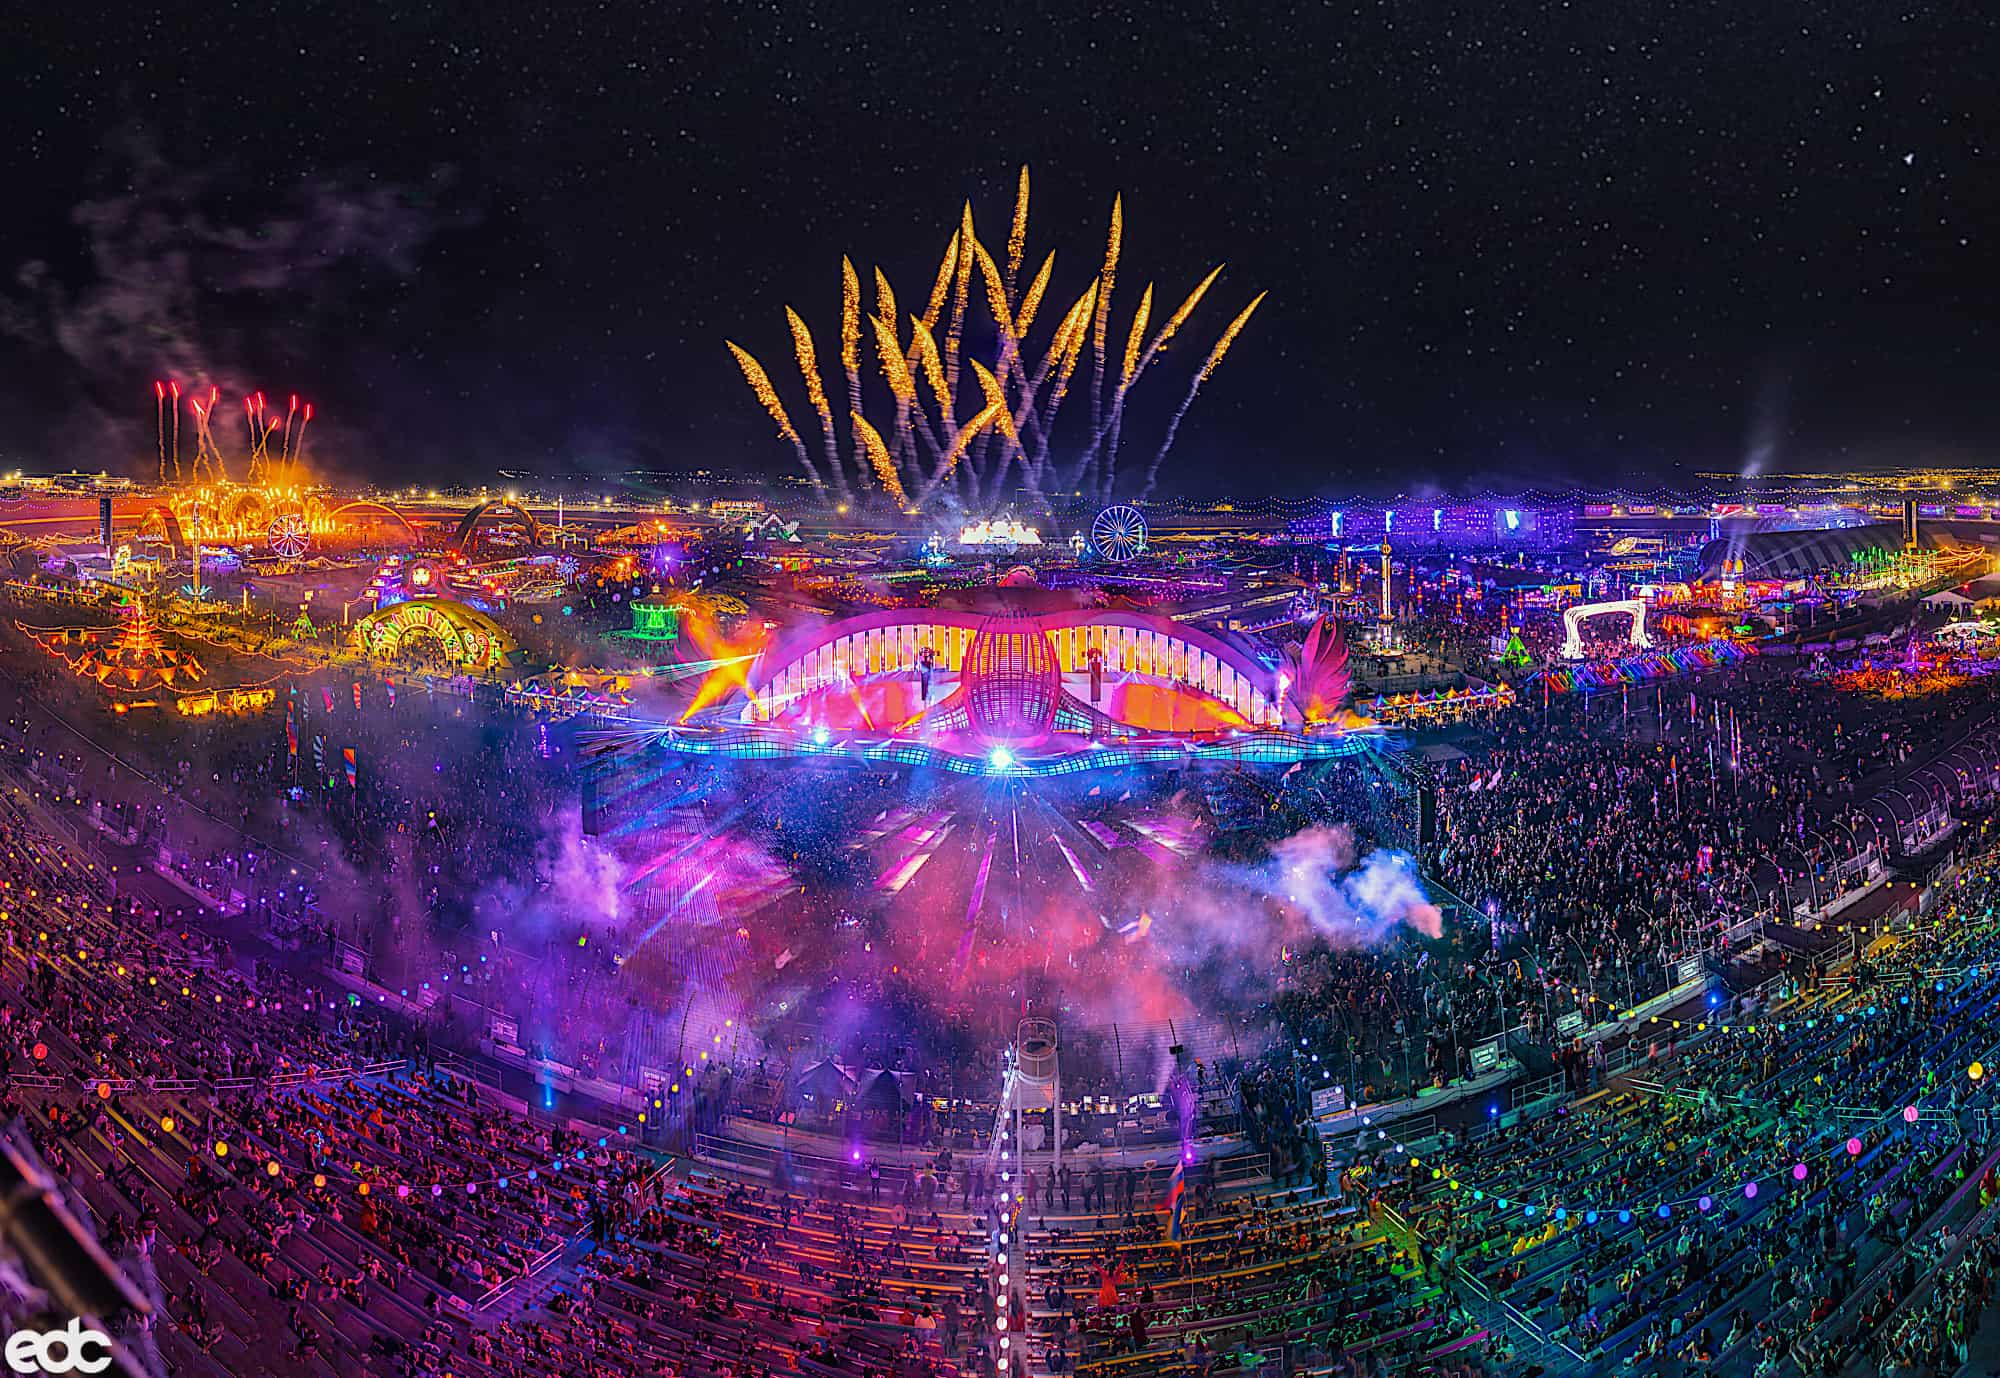 Insomniac reveals phase 2 lineup of EDC Week 2022 featuring Yellow Claw, TroyBoi & more